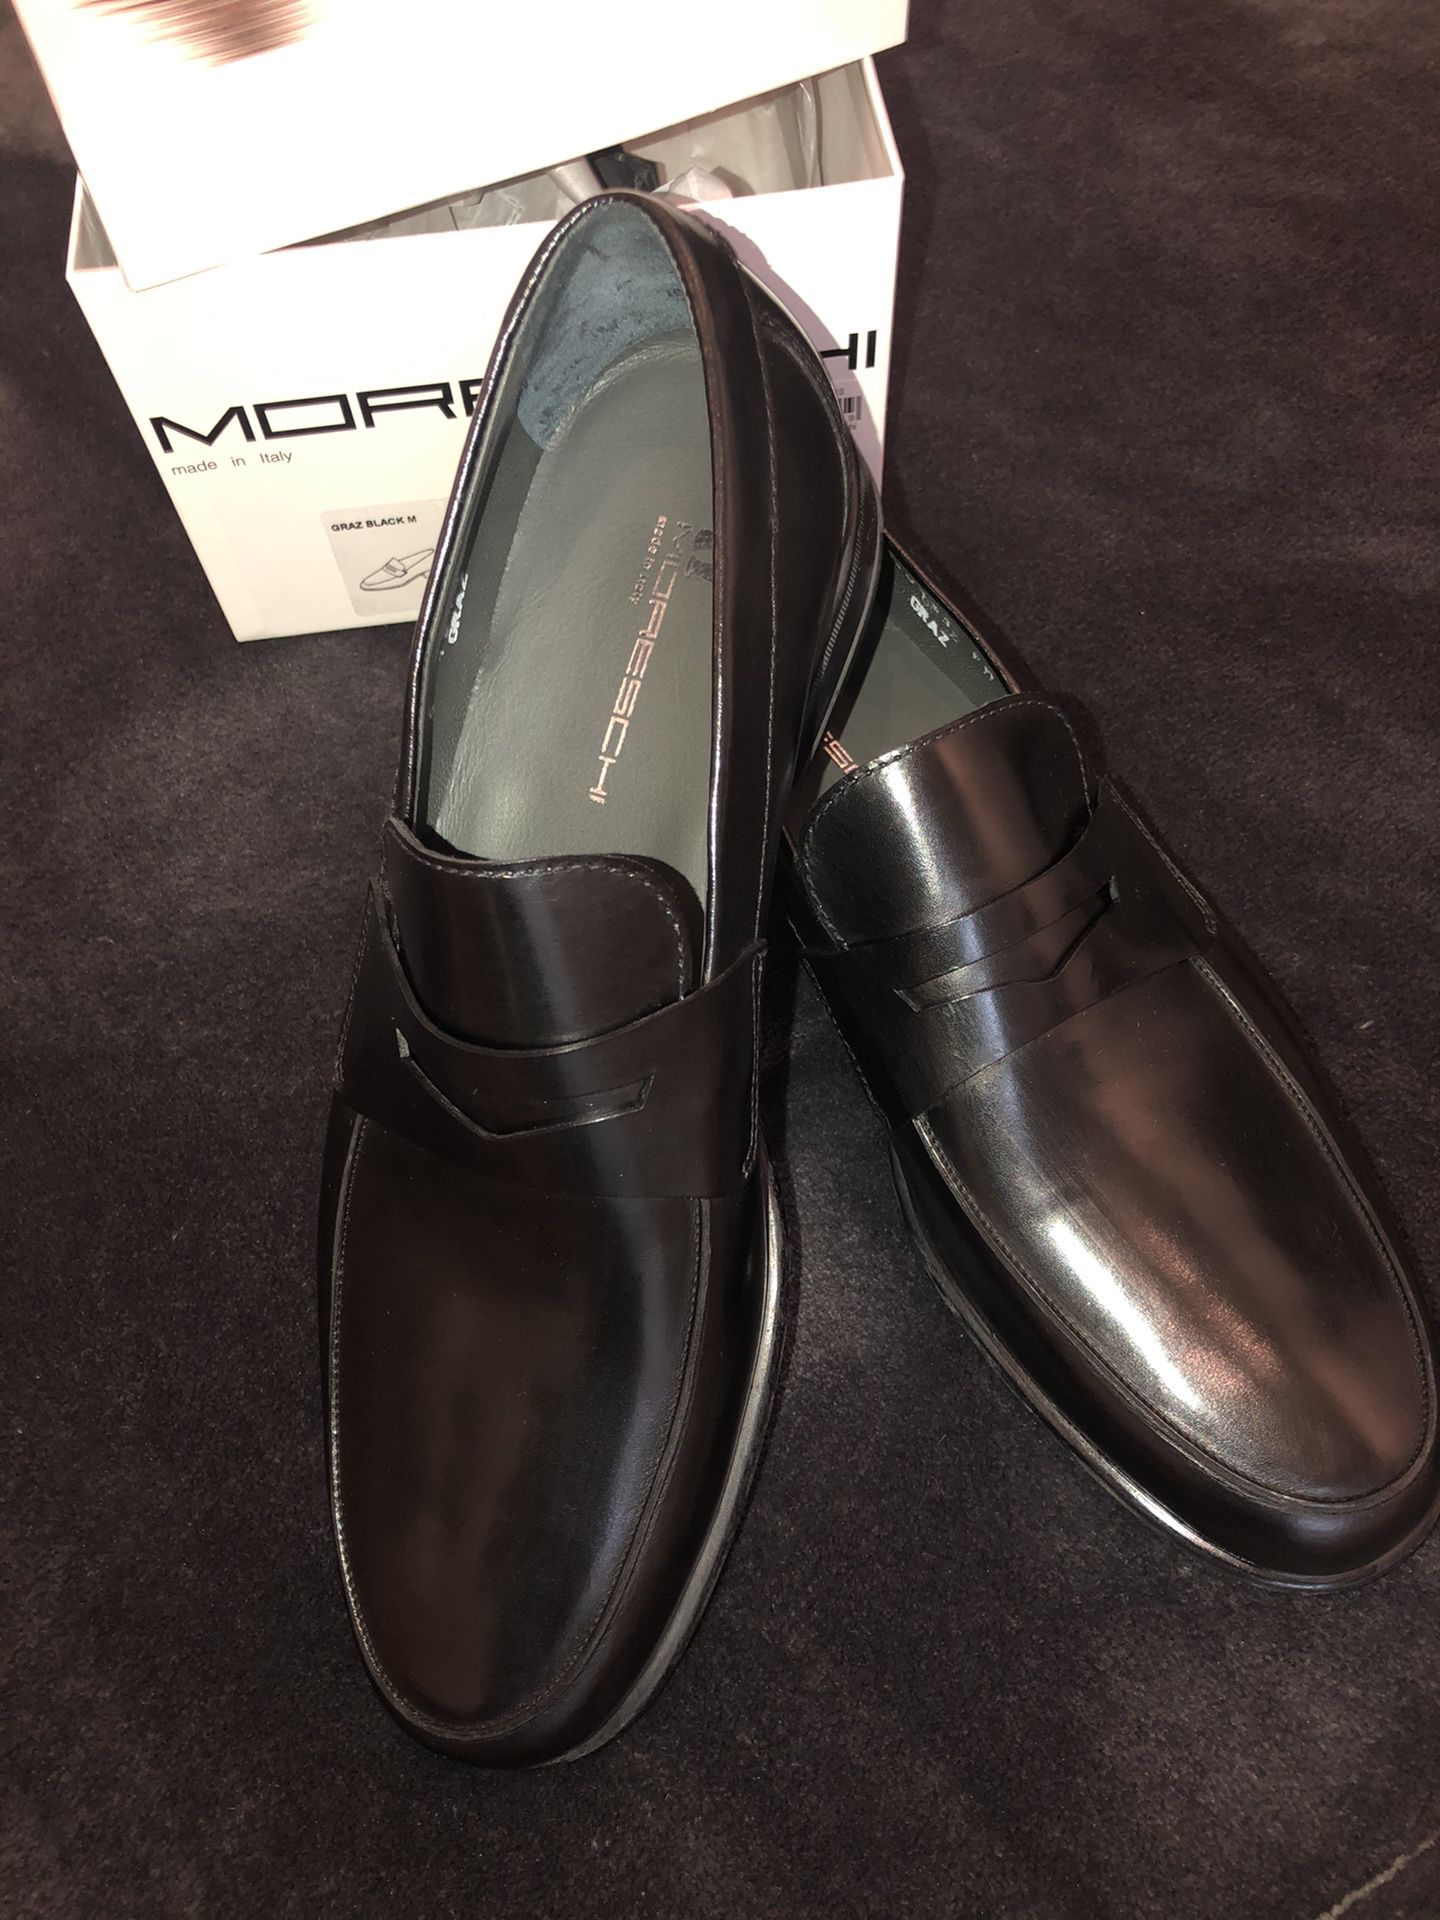 Italian Loafers by Moreschi. Purchased in Florence. Black Calf Leather. Brand New. NEVER worn. Men’s size 7 US; 6 UK; 40 EU